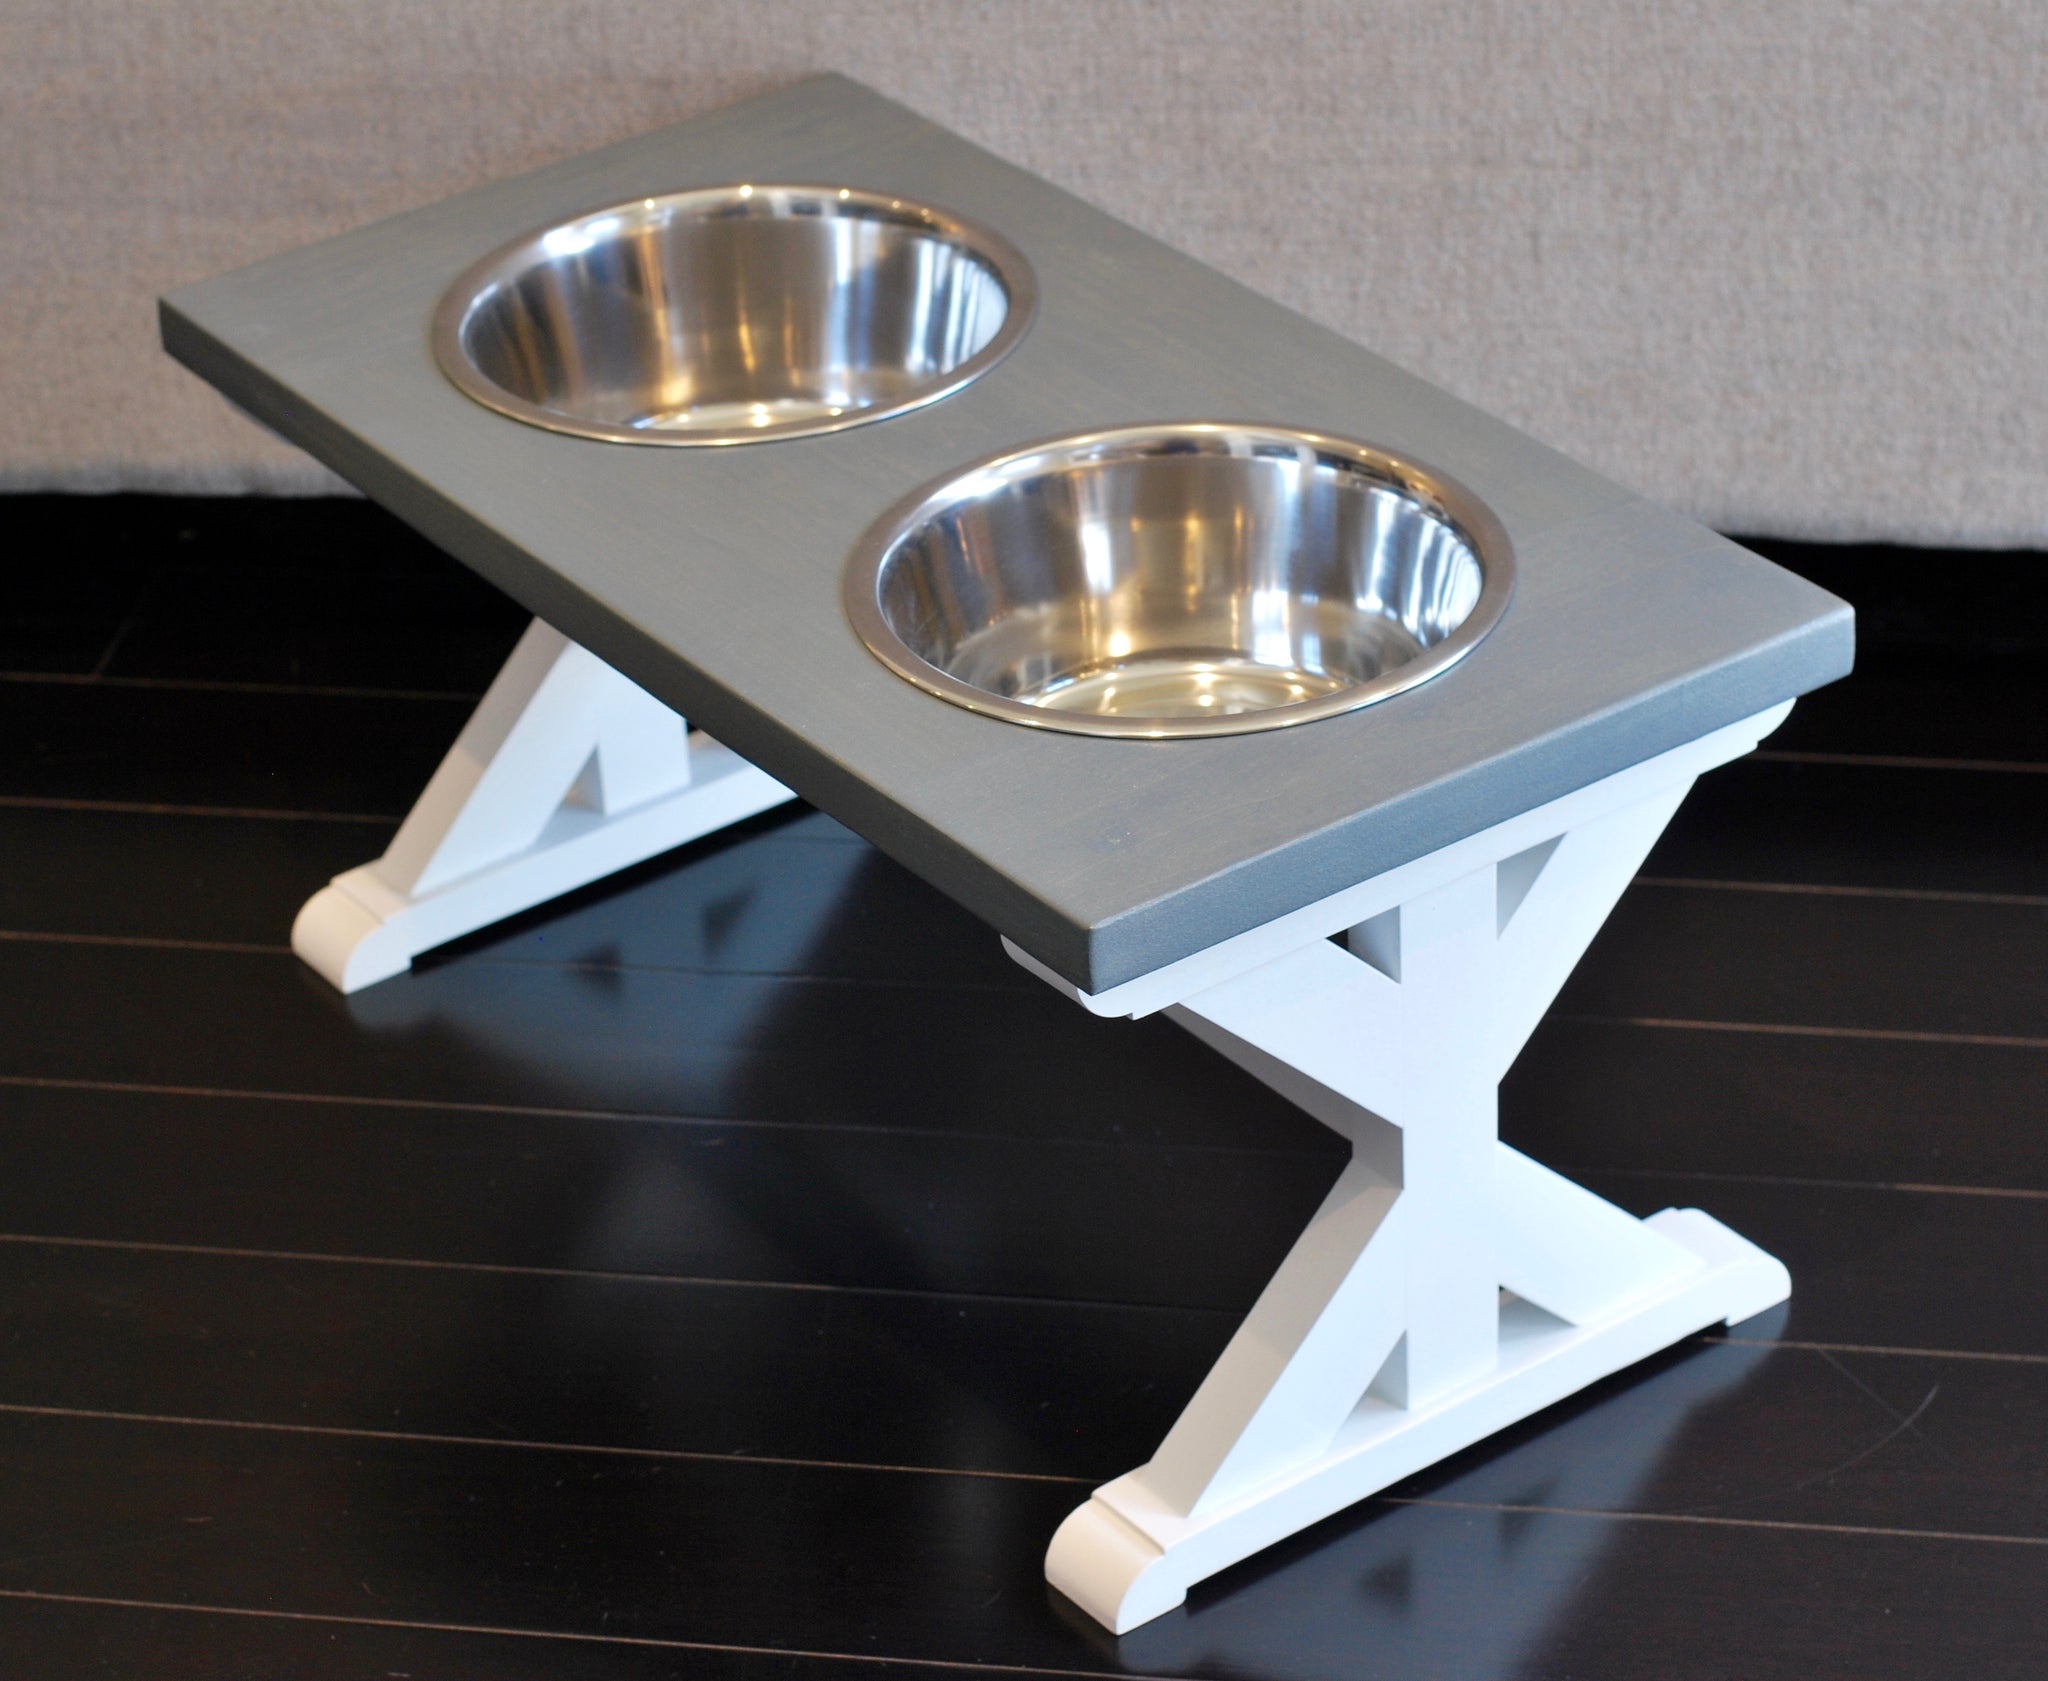 Extra Large Elevated Dog Bowl Stand - Trestle Farmhouse Two Bowl Stand